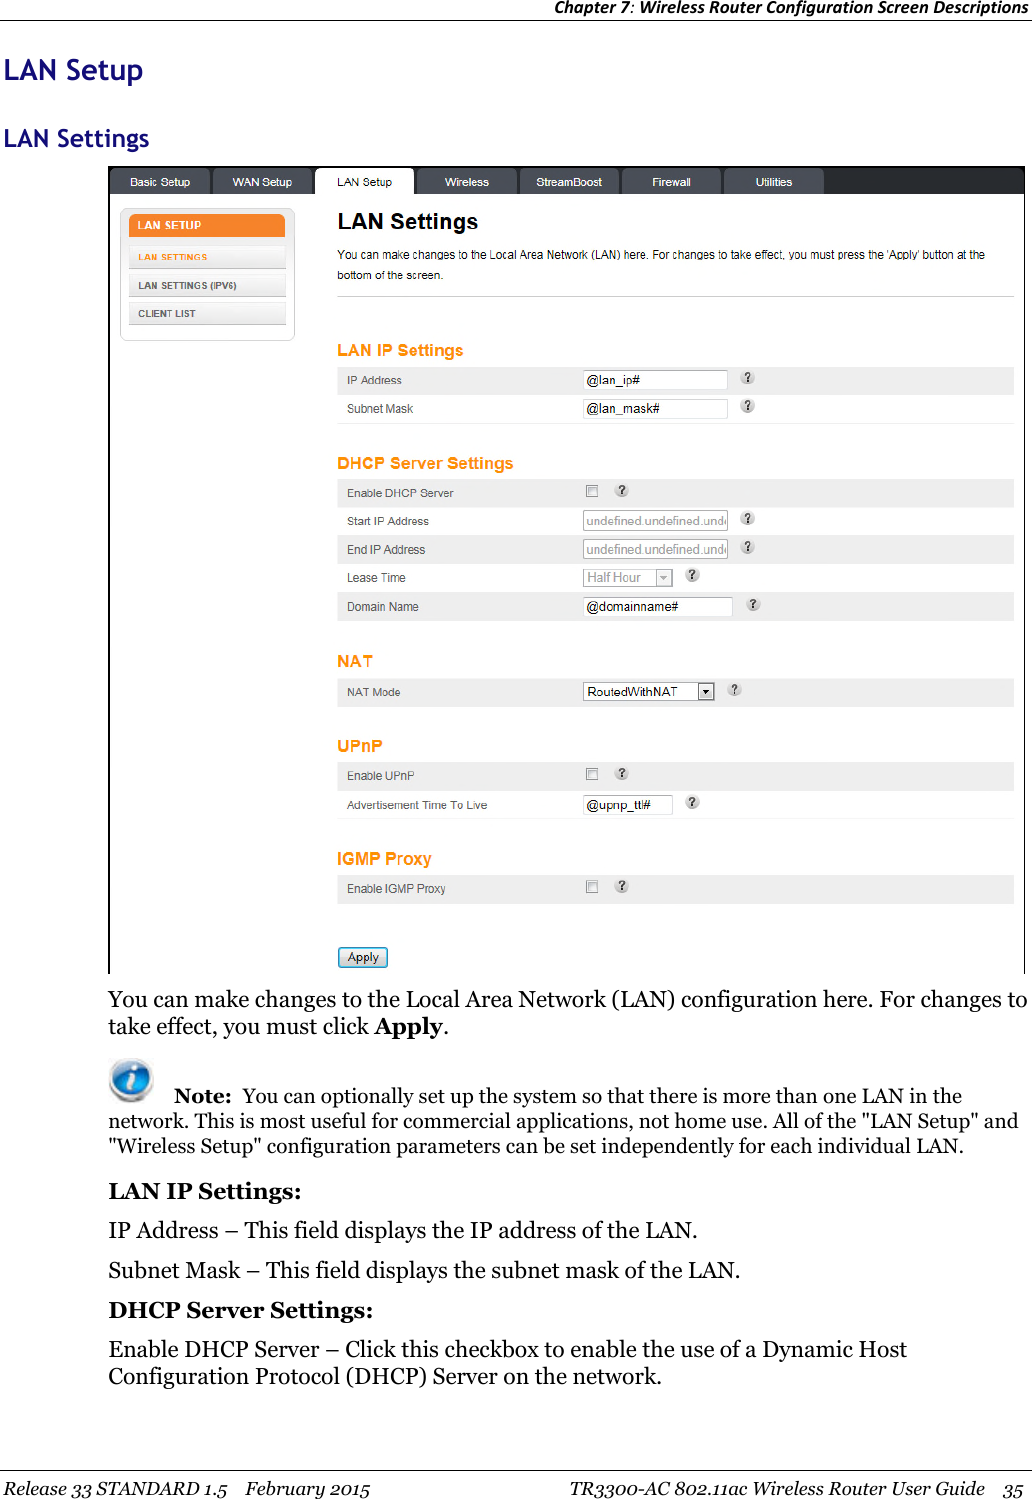 Chapter 7:Wireless Router Configuration Screen DescriptionsRelease 33 STANDARD 1.5 February 2015 TR3300-AC 802.11ac Wireless Router User Guide 35LAN SetupLAN SettingsYou can make changes to the Local Area Network (LAN) configuration here. For changes totake effect, you must click Apply.Note: You can optionally set up the system so that there is more than one LAN in thenetwork. This is most useful for commercial applications, not home use. All of the &quot;LAN Setup&quot; and&quot;Wireless Setup&quot; configuration parameters can be set independently for each individual LAN.LAN IP Settings:IP Address – This field displays the IP address of the LAN.Subnet Mask – This field displays the subnet mask of the LAN.DHCP Server Settings:Enable DHCP Server – Click this checkbox to enable the use of a Dynamic HostConfiguration Protocol (DHCP) Server on the network.